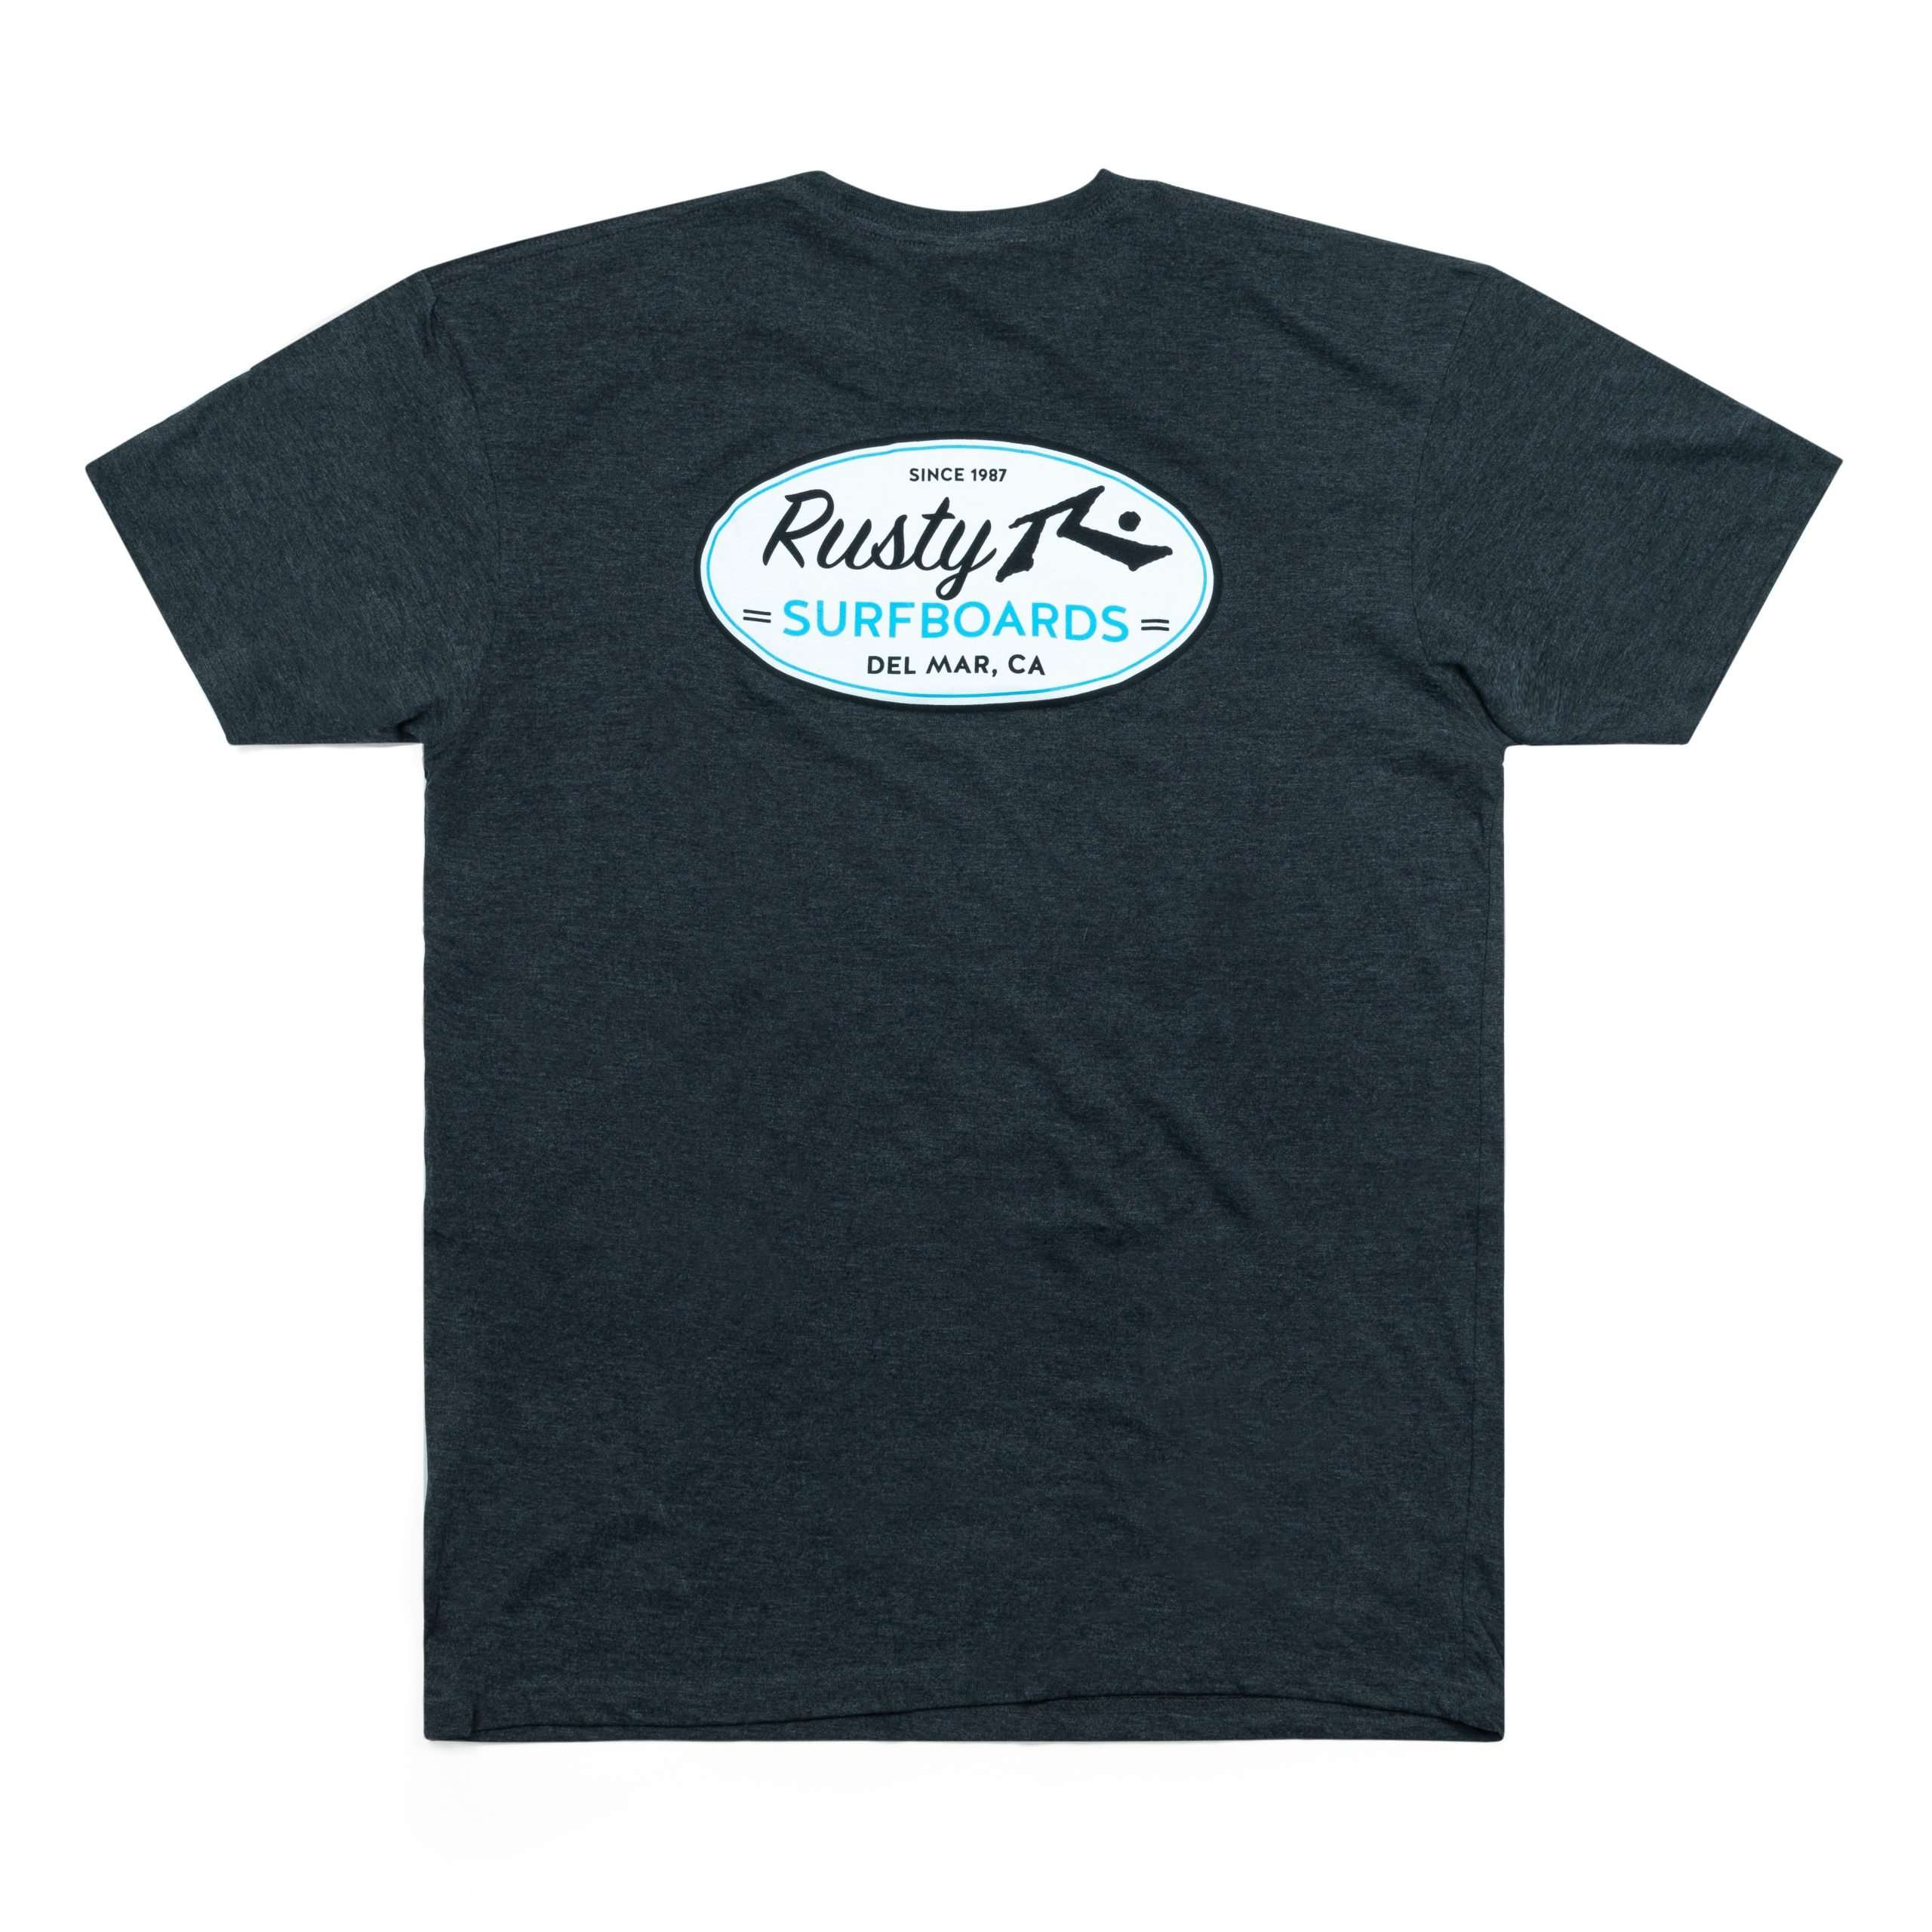 Oval Patch T-Shirt in Charcoal Heather